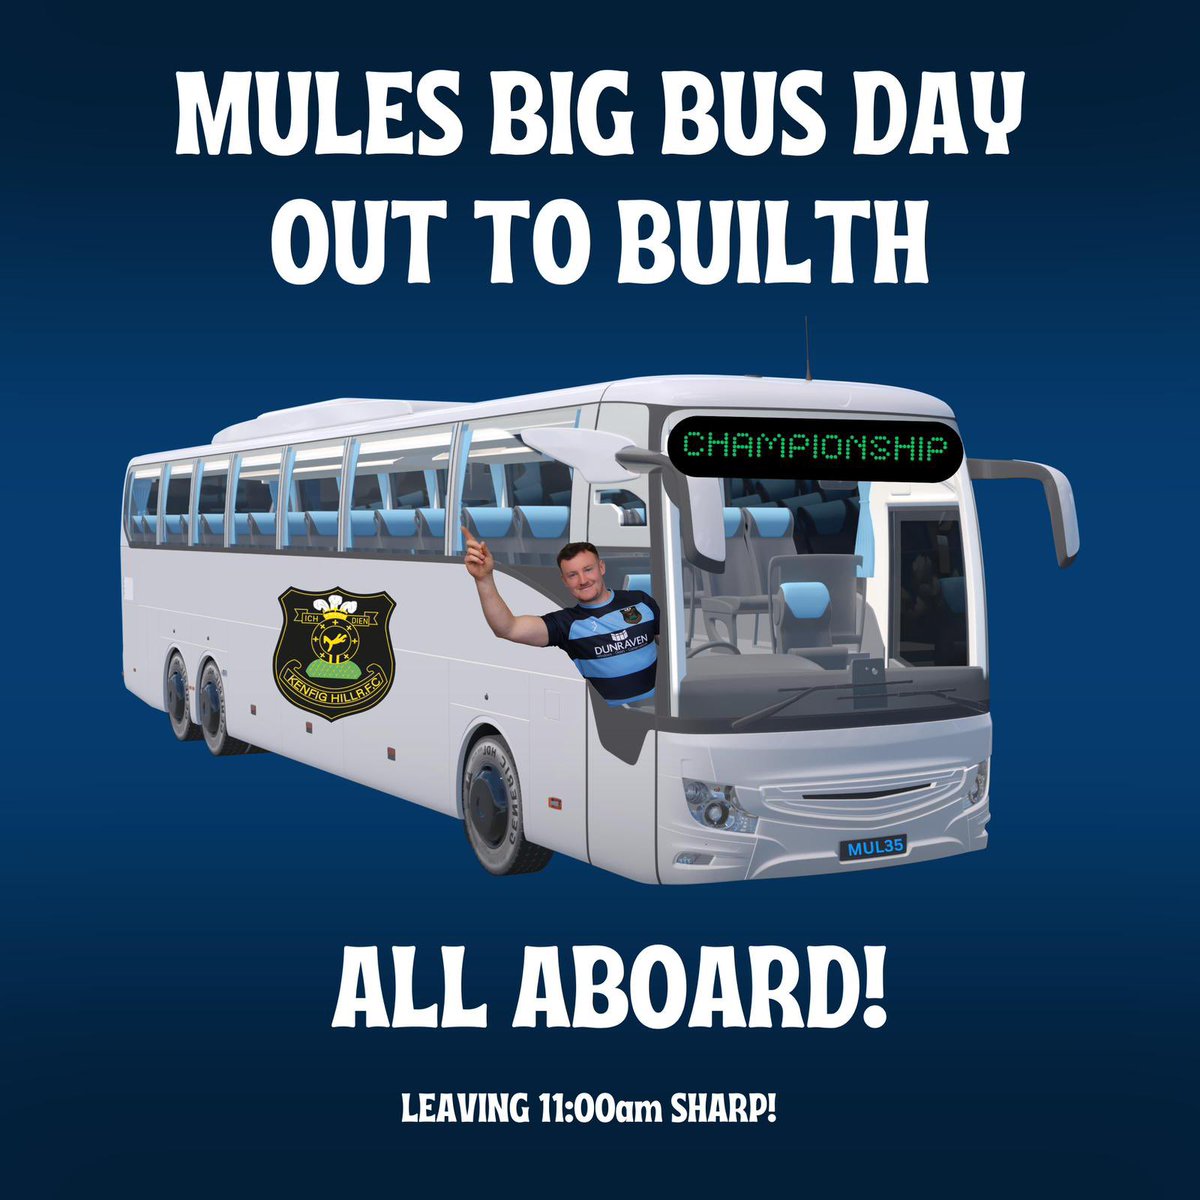 Saturday May 11th is our final game of the season away at @BUILTHR There are 2 supporters buses booked with a few spare places remaining. Cost is £15 per person. Contact team manager Mikey Guy @savagemule 07740 574325 to book your place. #HalaMules #dixieatthewheel 👍🏉